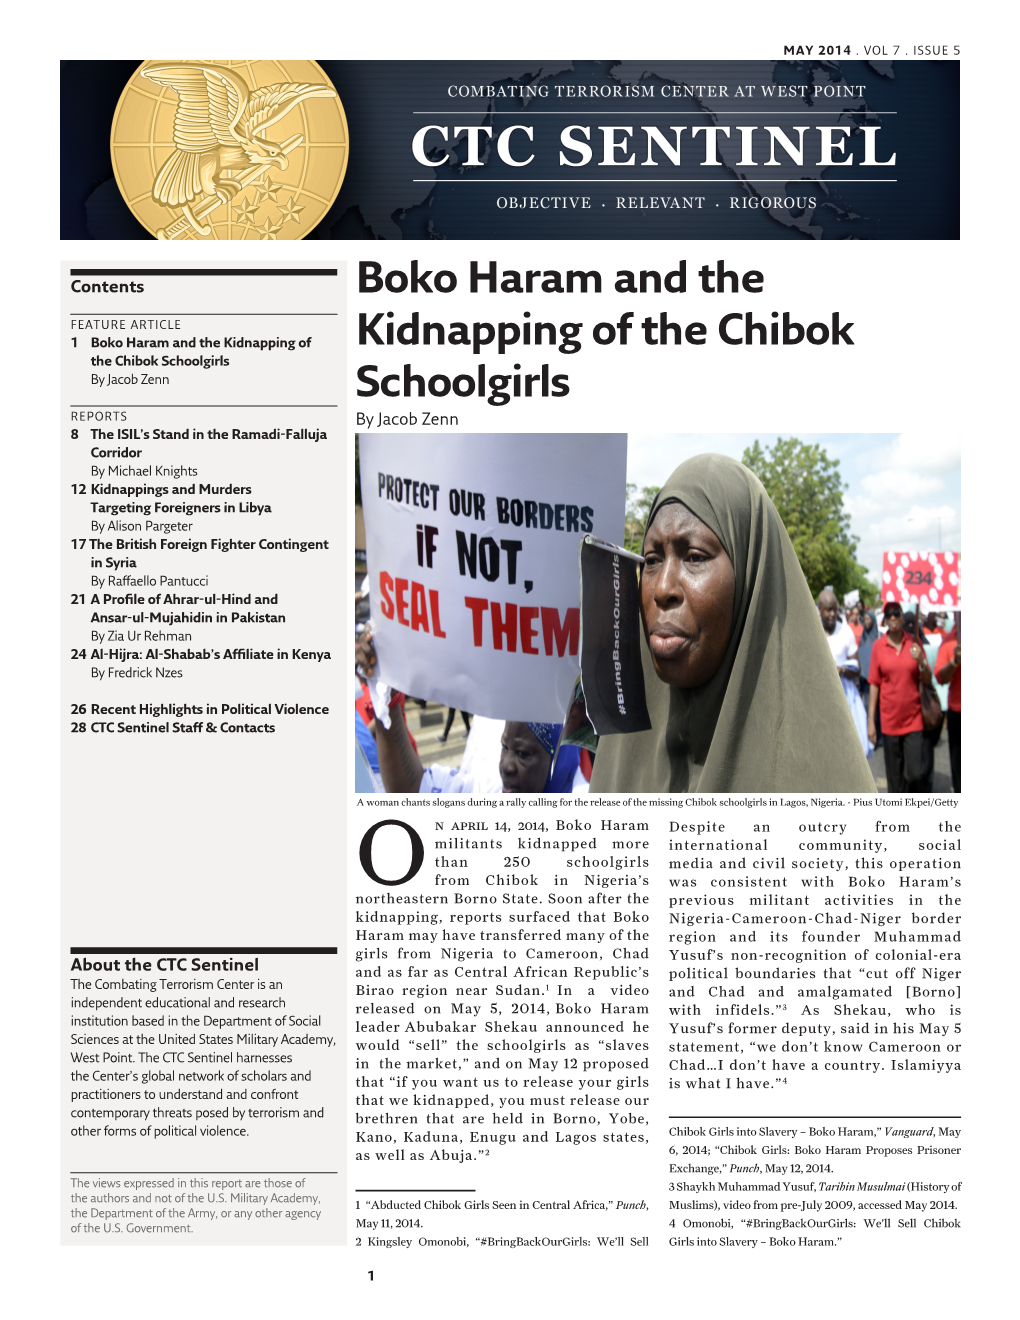 Boko Haram and the Kidnapping of the Chibok Schoolgirls